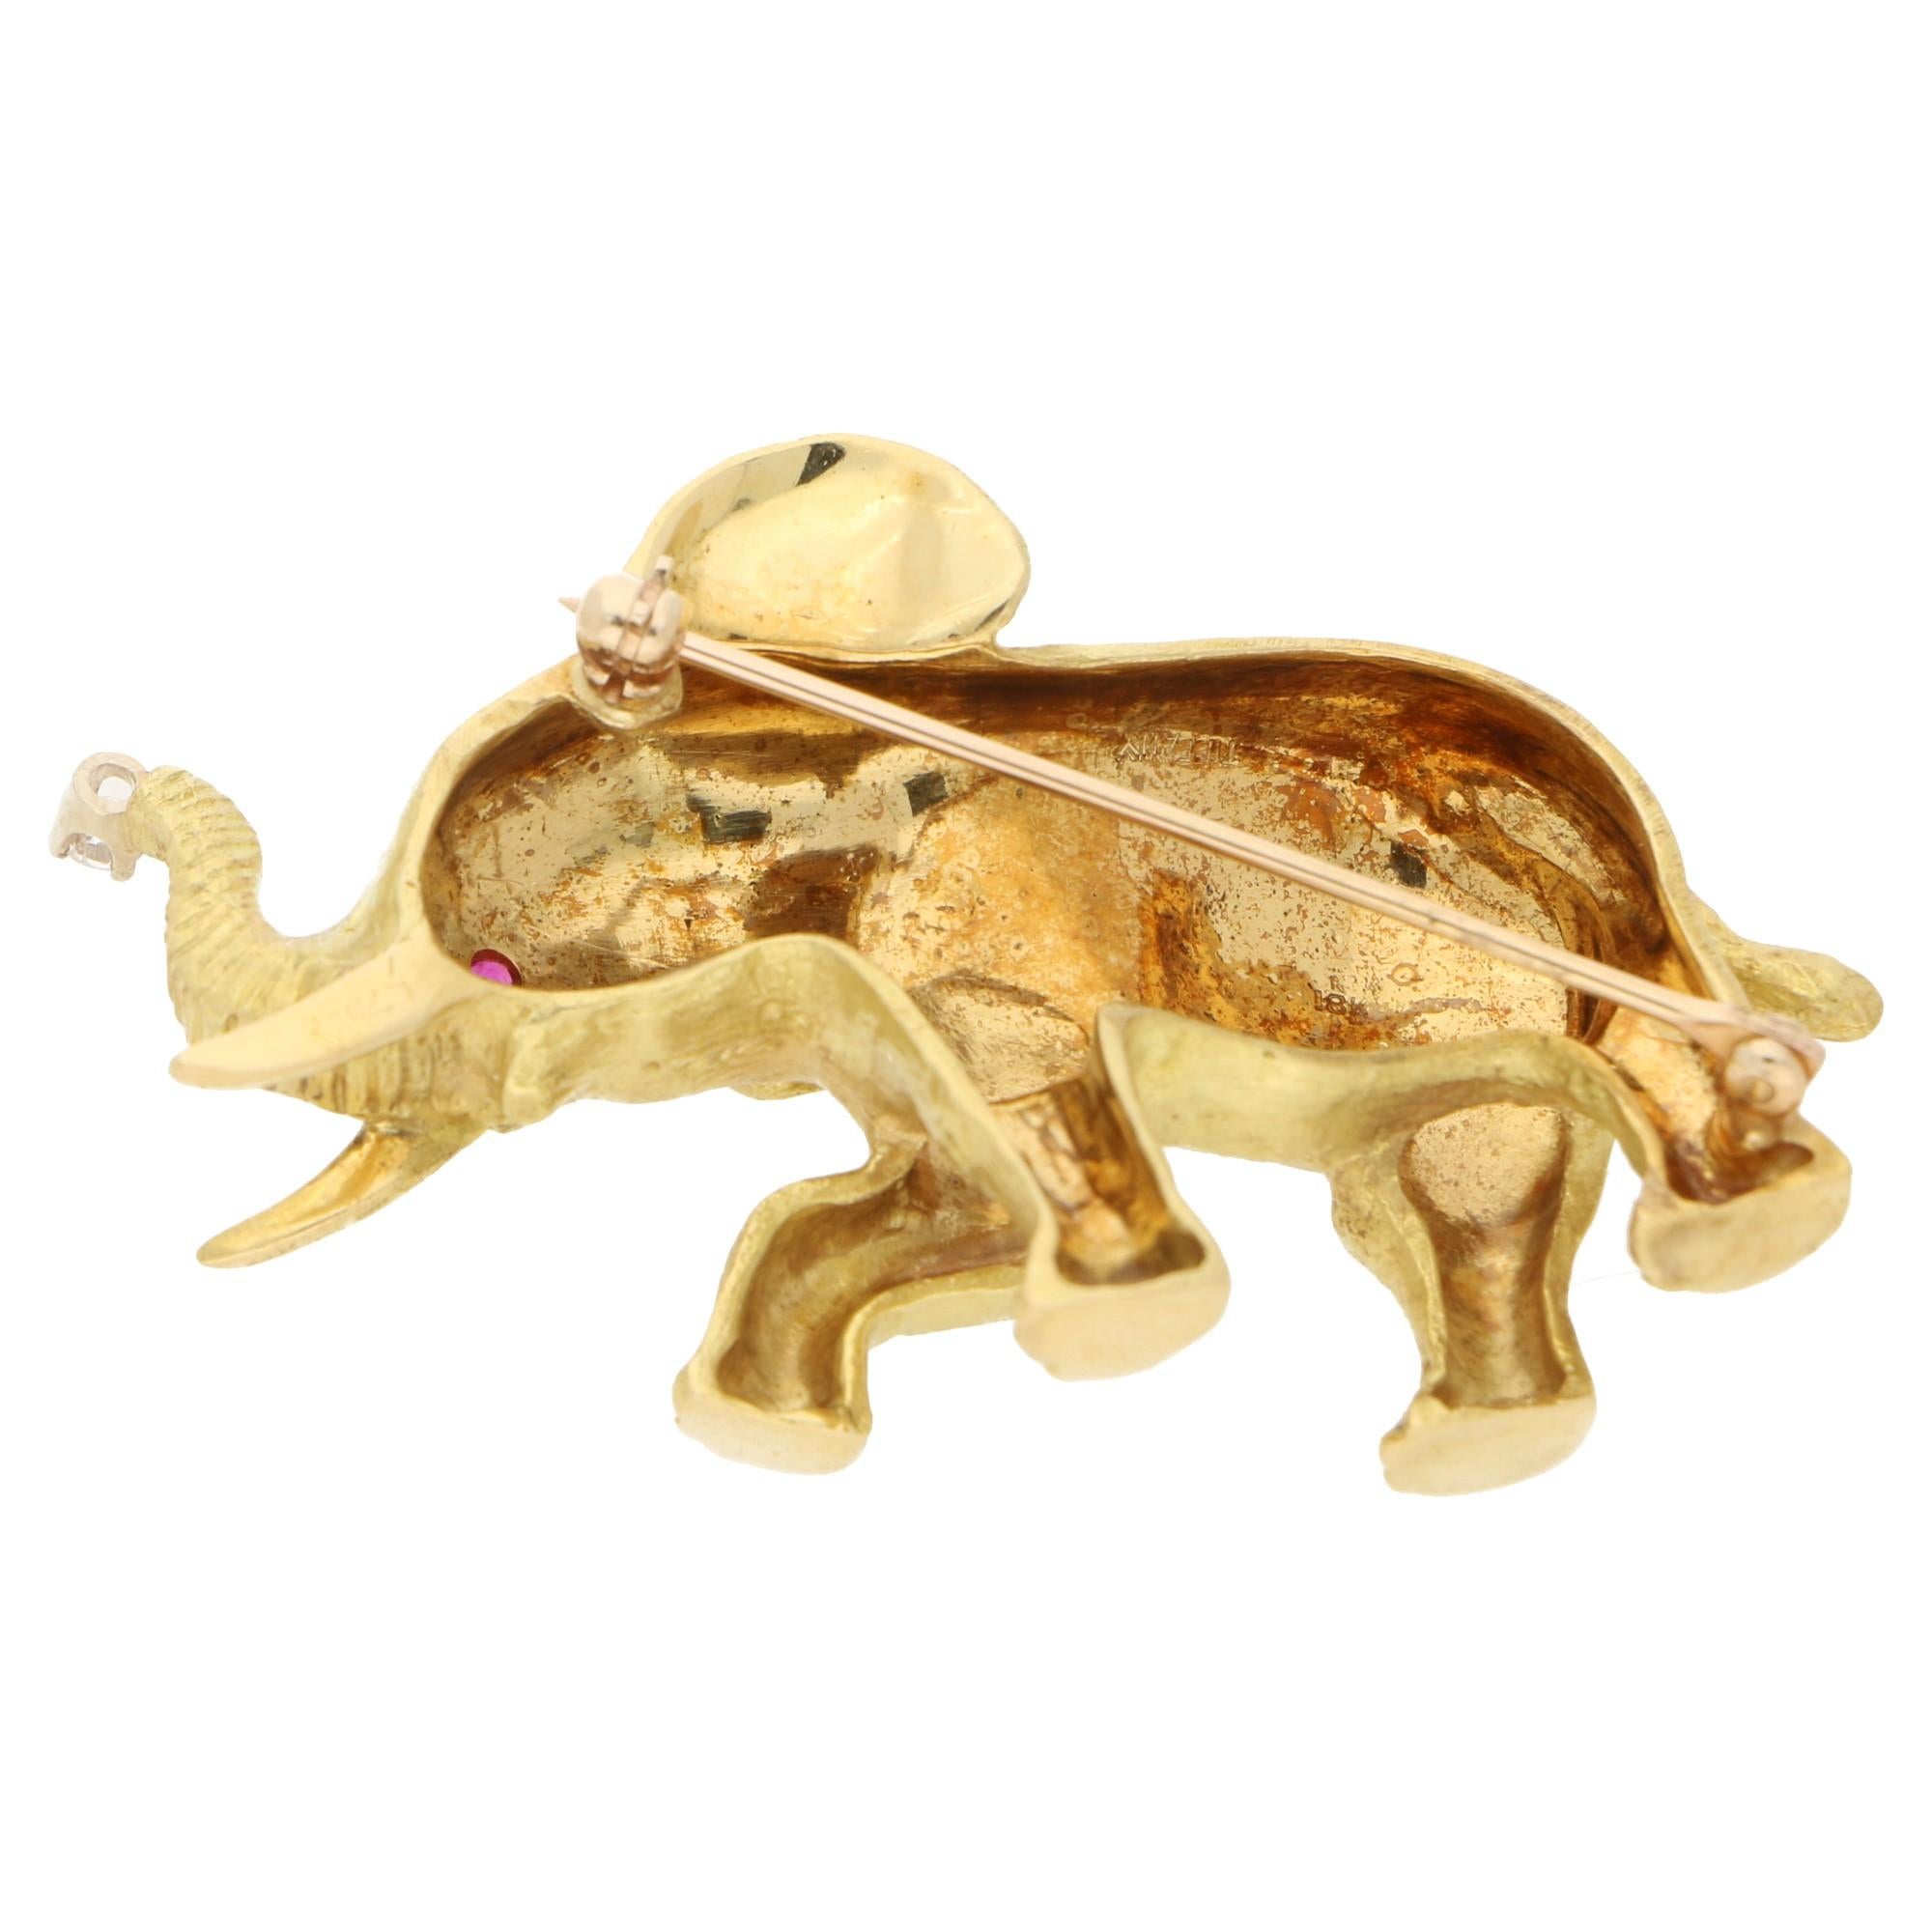  A dramatic Tiffany & Co elephant brooch in 18-karat yellow gold. The brooch is designed as a naturalistic moving elephant with the front right leg and the trunk raised powerfully, the trunk accented at the tip with a round brilliant-cut diamond of